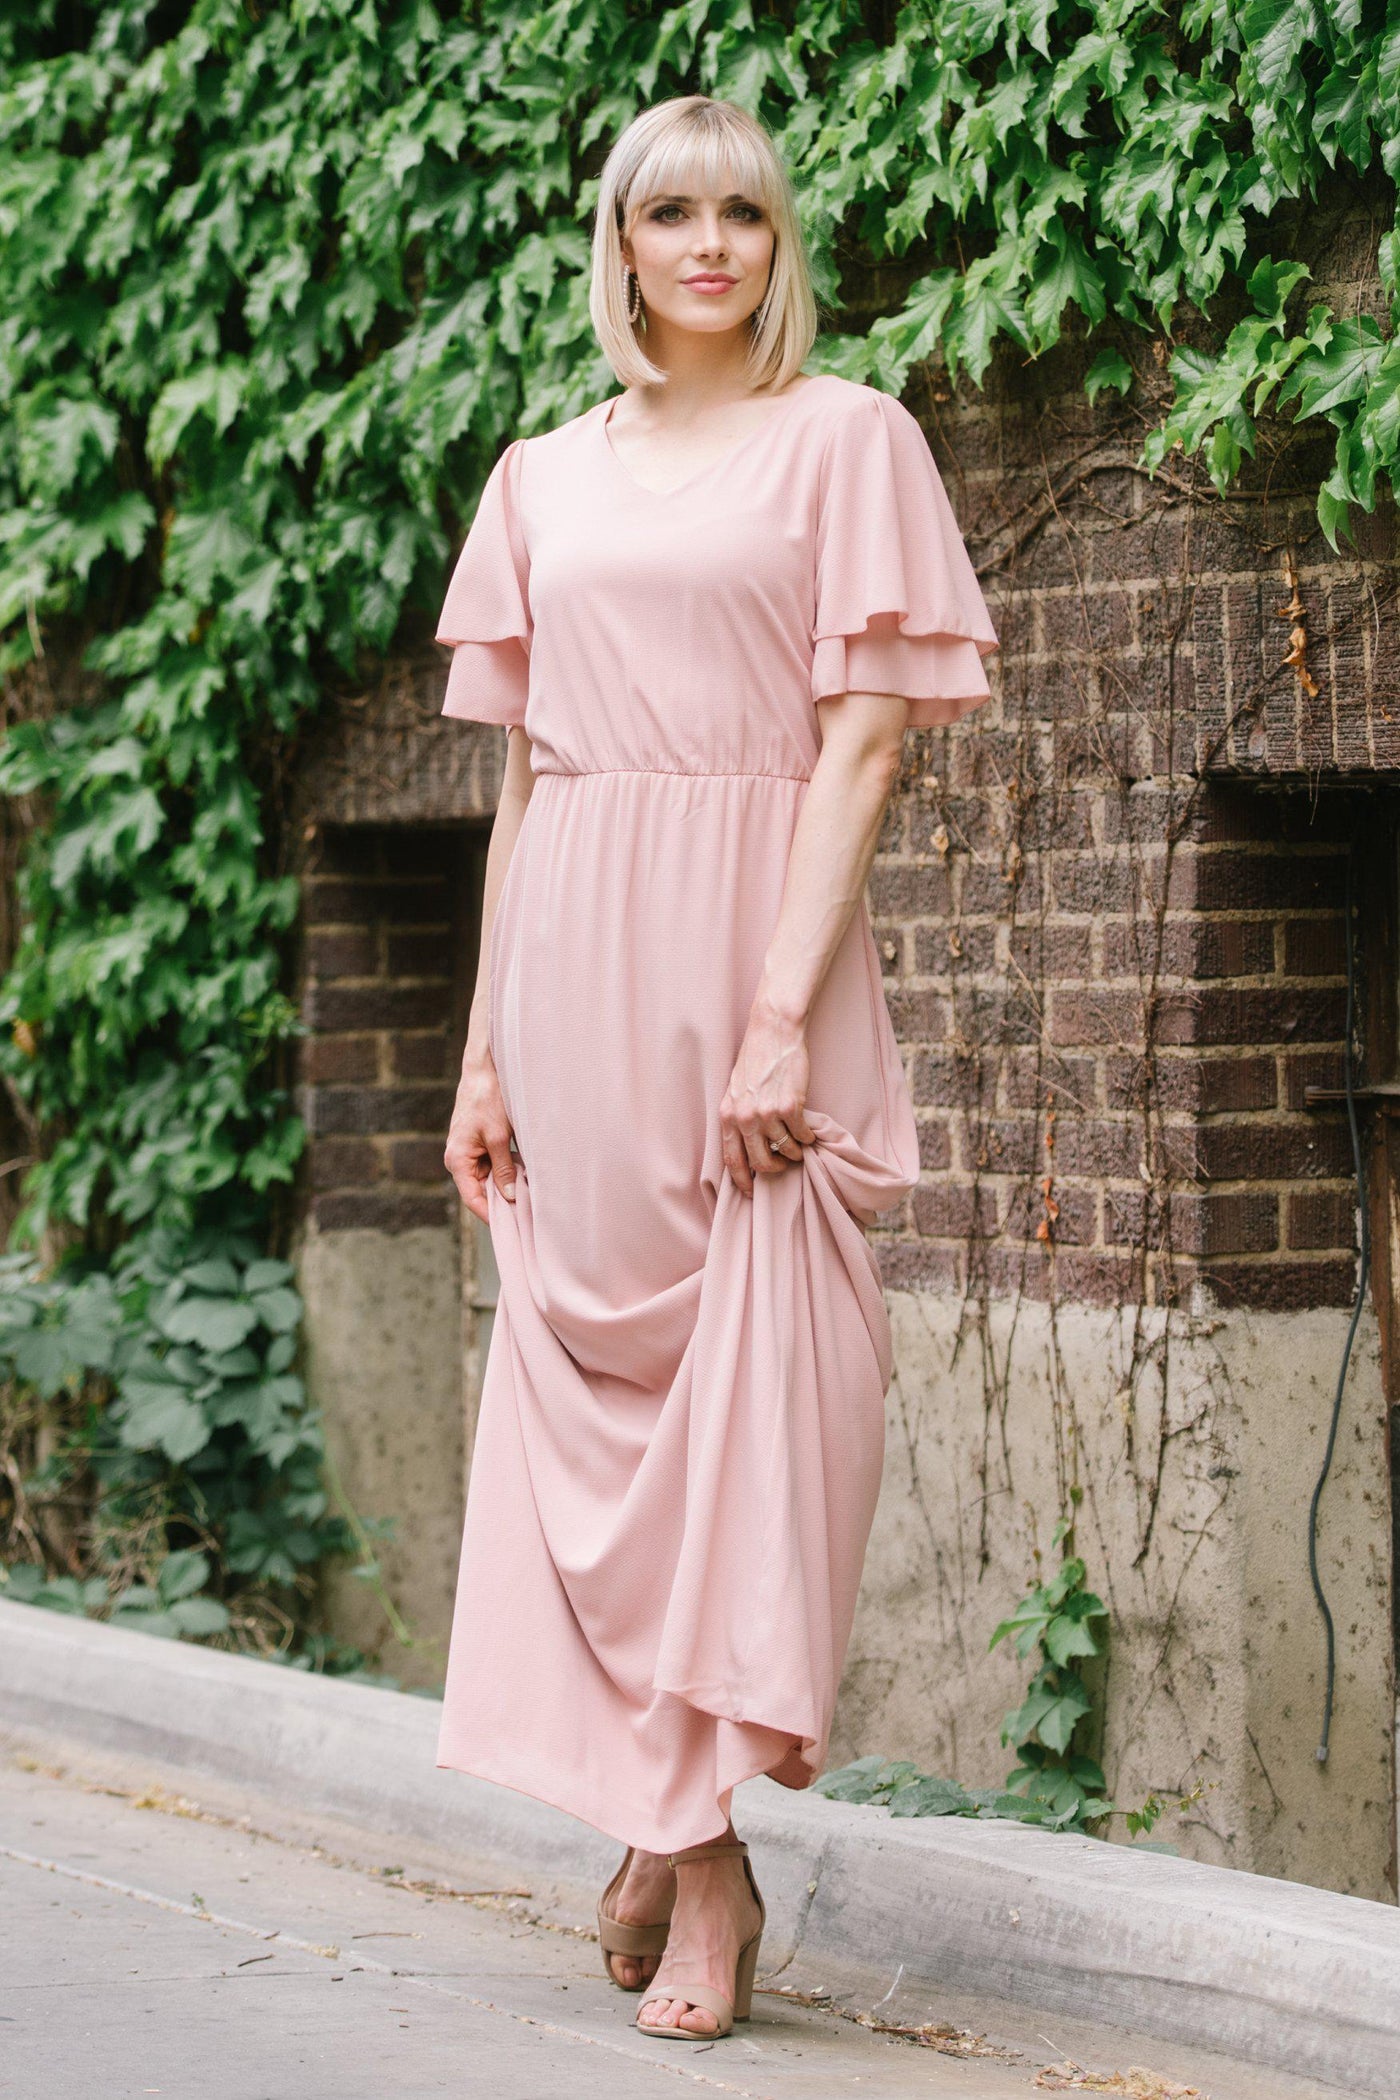 Floor length formal wear or bridesmaid dress with tiered butterfly sleeves in blush pink from a Salt Lake City bridal shop.